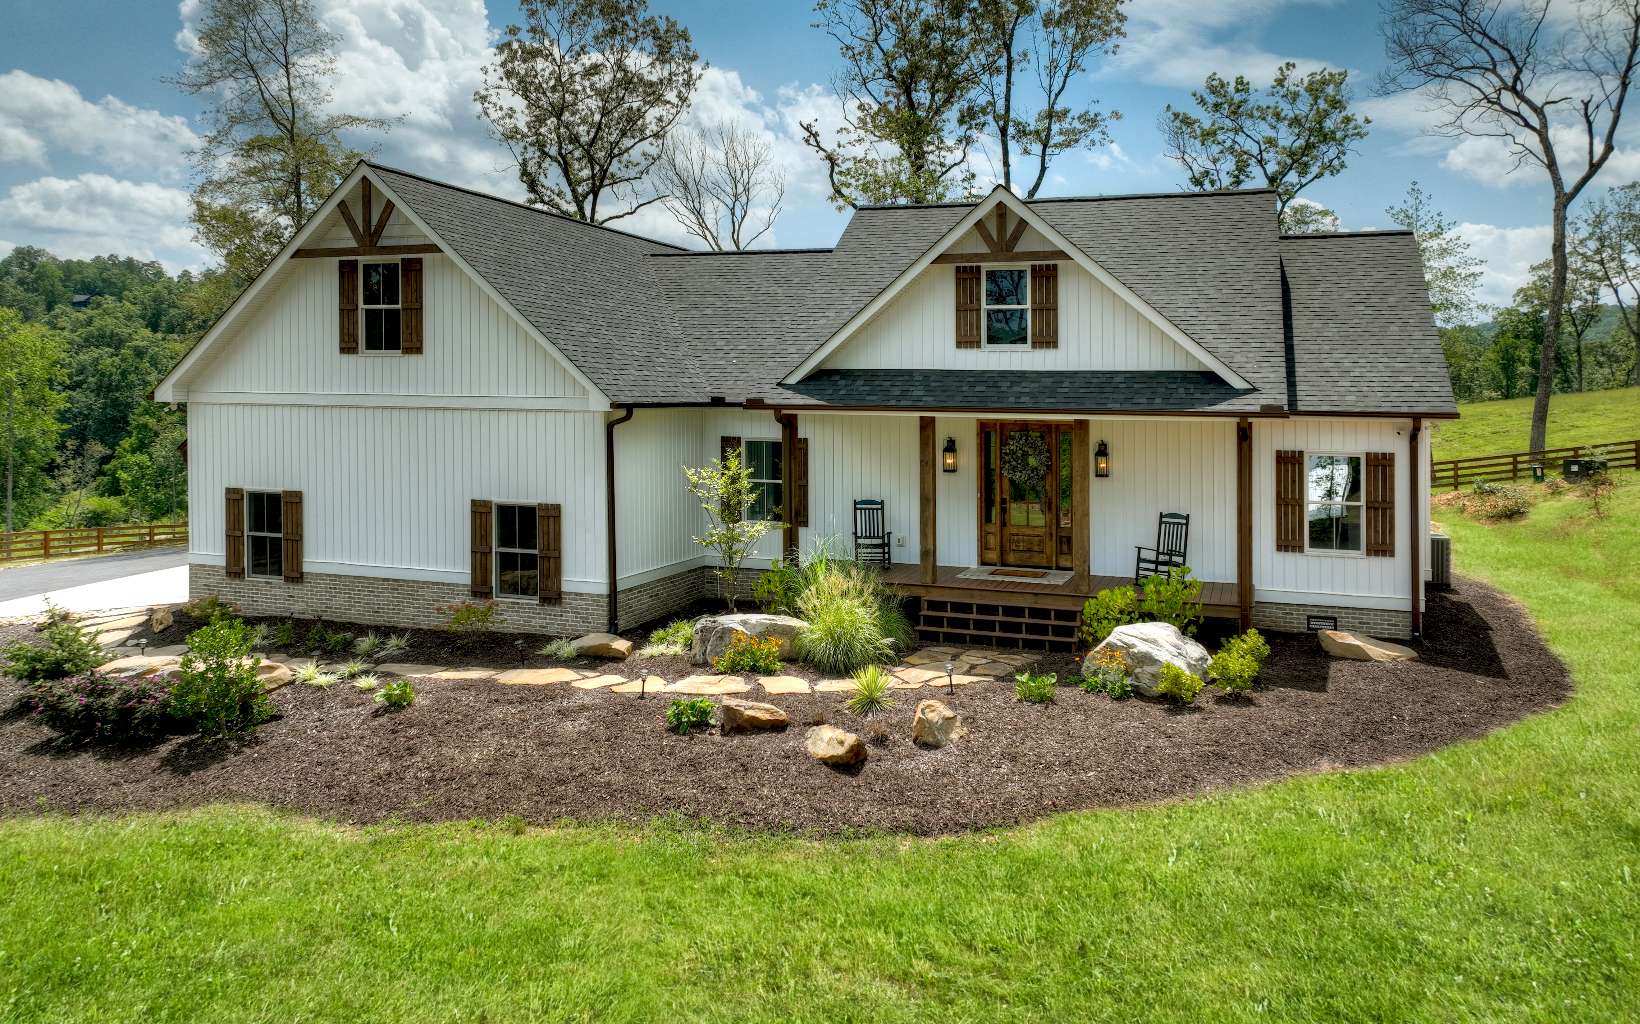 19+ acre farm located w/in 2 mi of Downtown Blue Ridge?!? YOU BET YA! Fully fenced perimeter, 36x60 barn PLUS a 40x80 pole barn! Builder's fully furnished home features all one level living w 3br/2ba, herringbone brick floors, gourmet kitchen w pantry, cathedral ceilings in great room, large MBR & MBA w wet bath, PLUS upper level unfinished space (builder will finish however you prefer - included in purchase price) great for apartment, addt'l br/ba, MIL suite, etc... The barn has two 10x60 lean to sheds, tack room, 4 12x12 stalls, tool room, chicken coop, AND a furnished 1br/1ba apartment! There's also an RV hookup plus septic drain! Approx 12-15 acres of pasture land & remaining acreage is wooded. All paved access, public utilities & professional landscaping w fire pit area! PLEASE ASK FOR THE ADDITIONAL INFO LIST!!